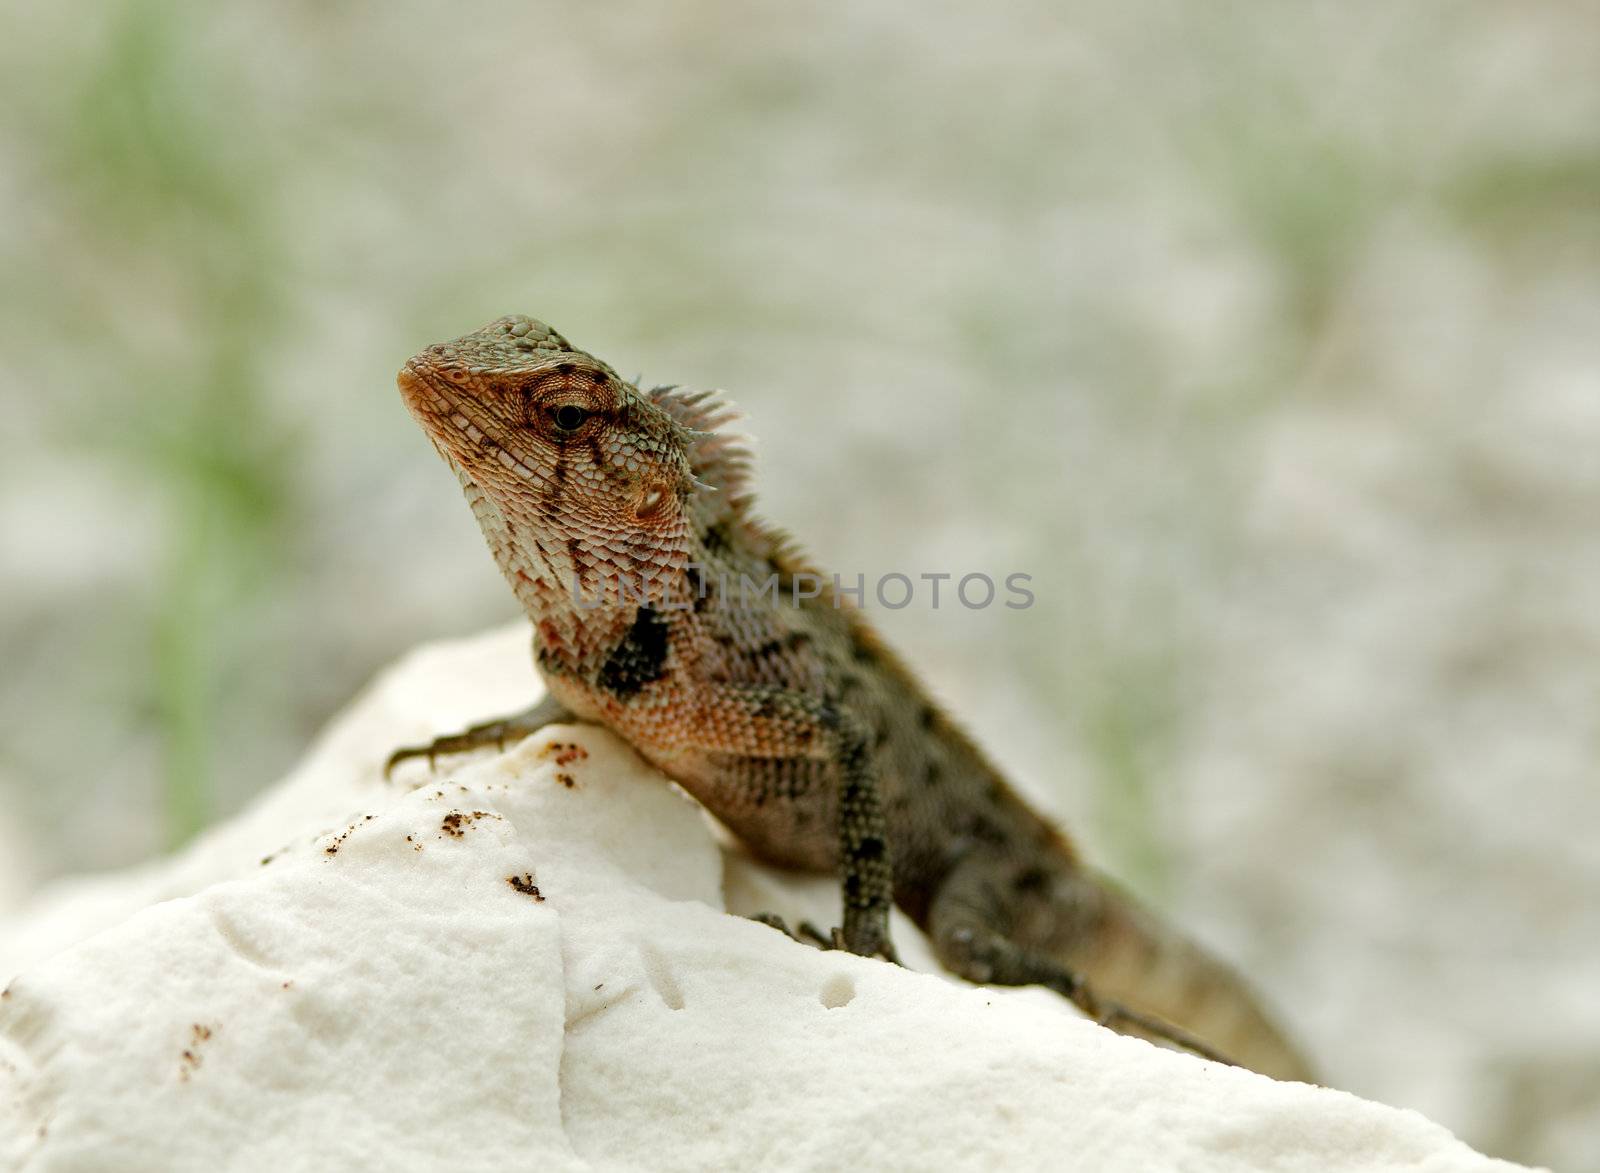 Agama Lizard in natural environment on white stone 